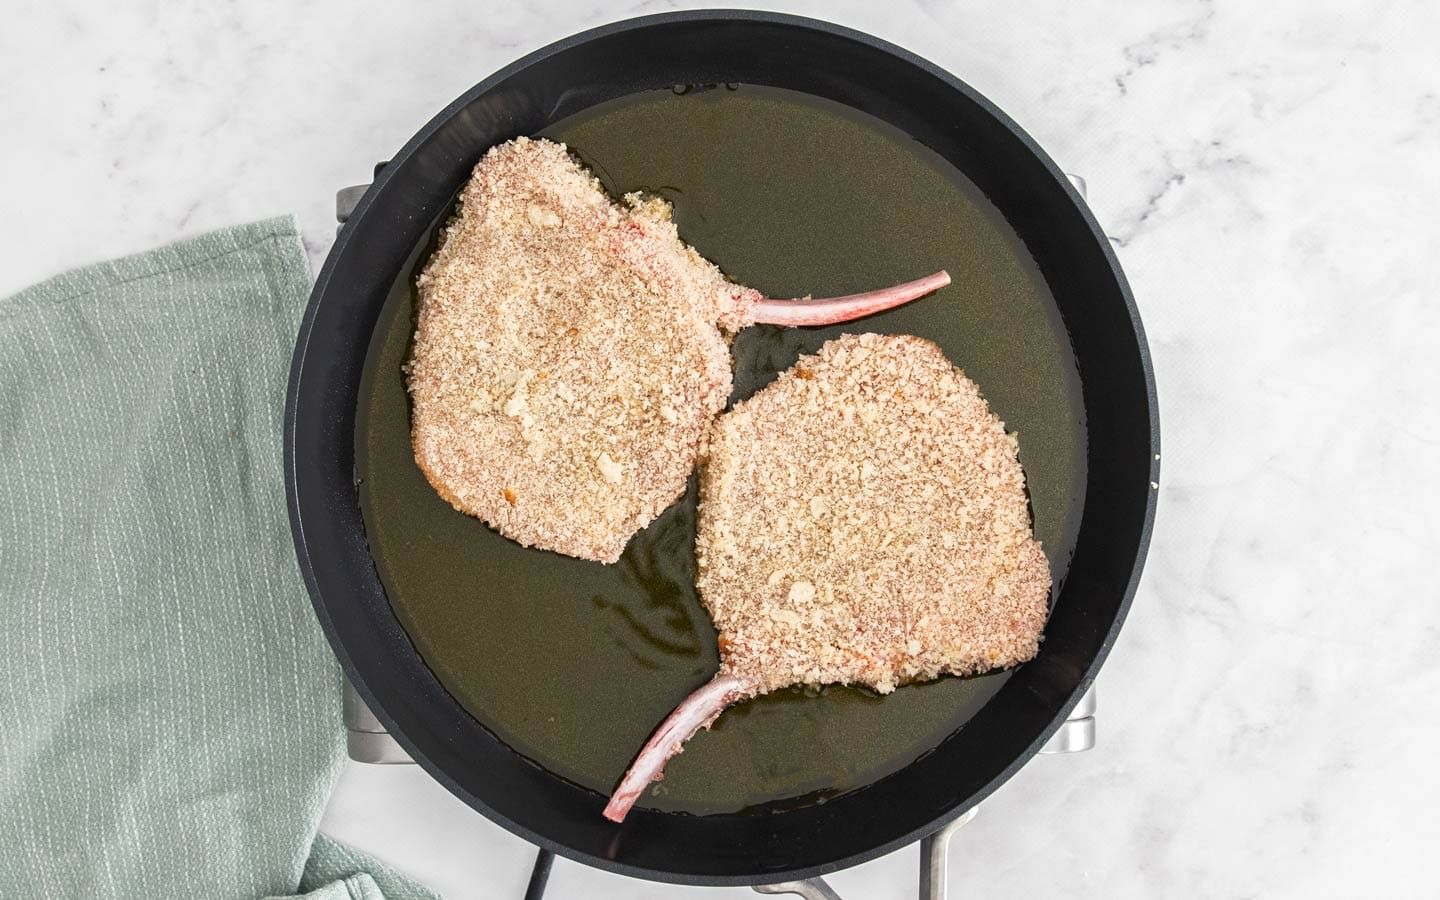 Two pork cutlets in a frying pan beginning to fry.